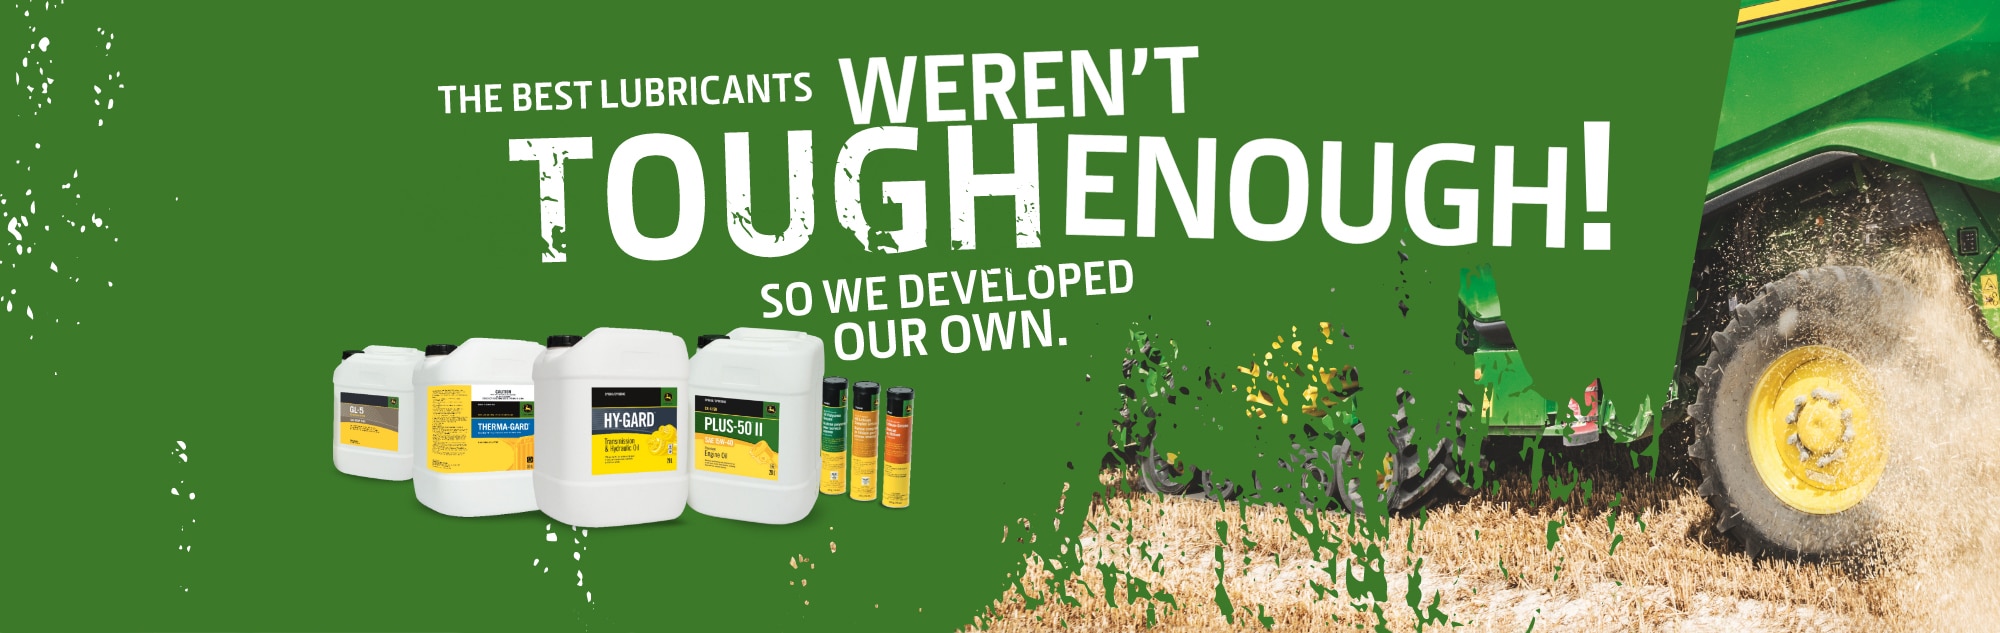 John Deere Lubricants - the best lubricants weren't tough enough! So we developed our own